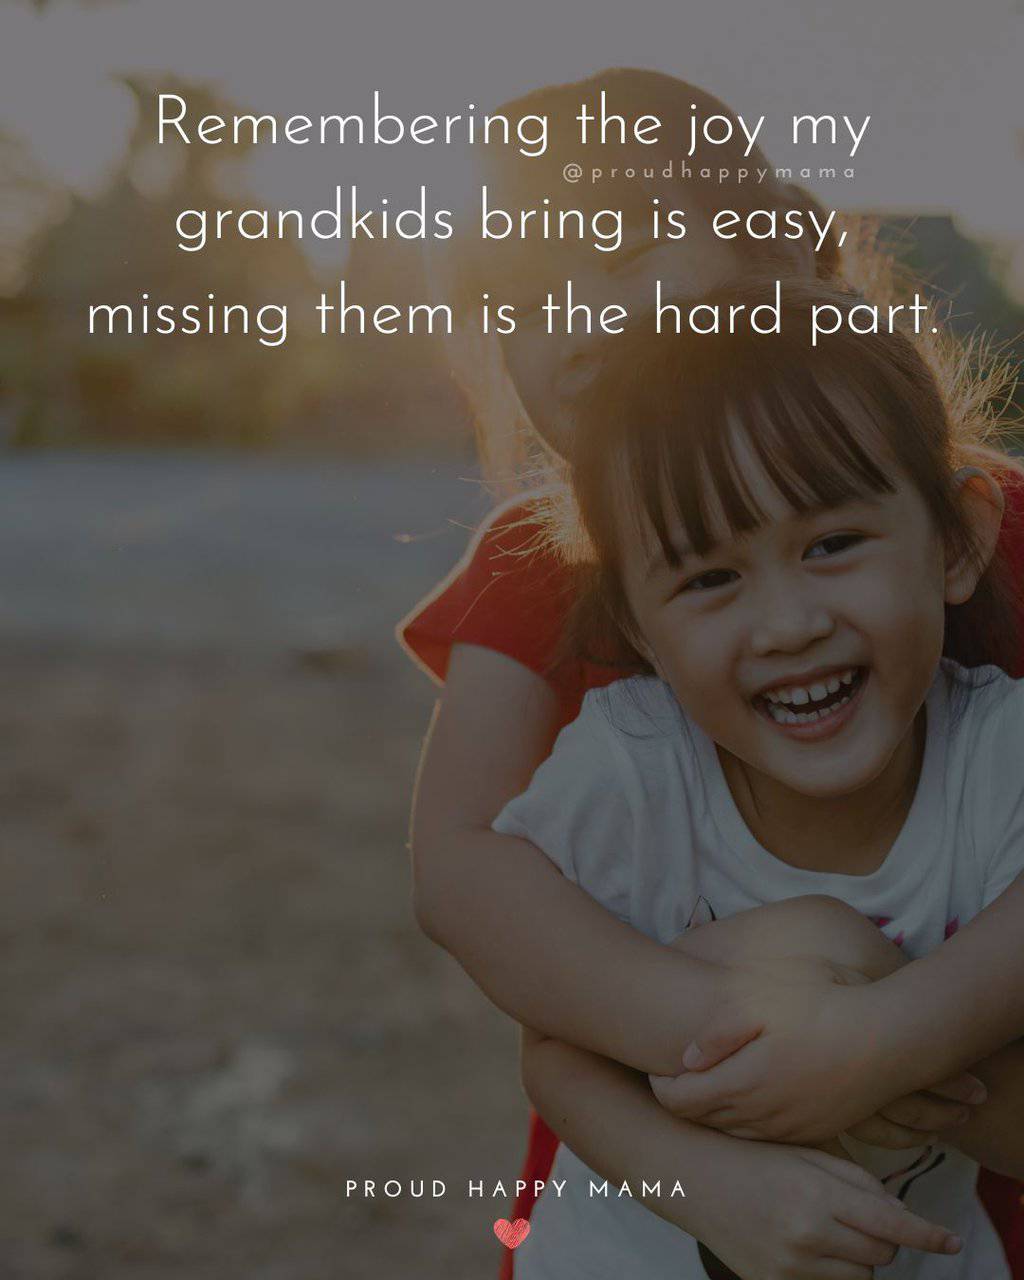 Remembering the joy my grandkids bring is easy, missing them is the hard part.